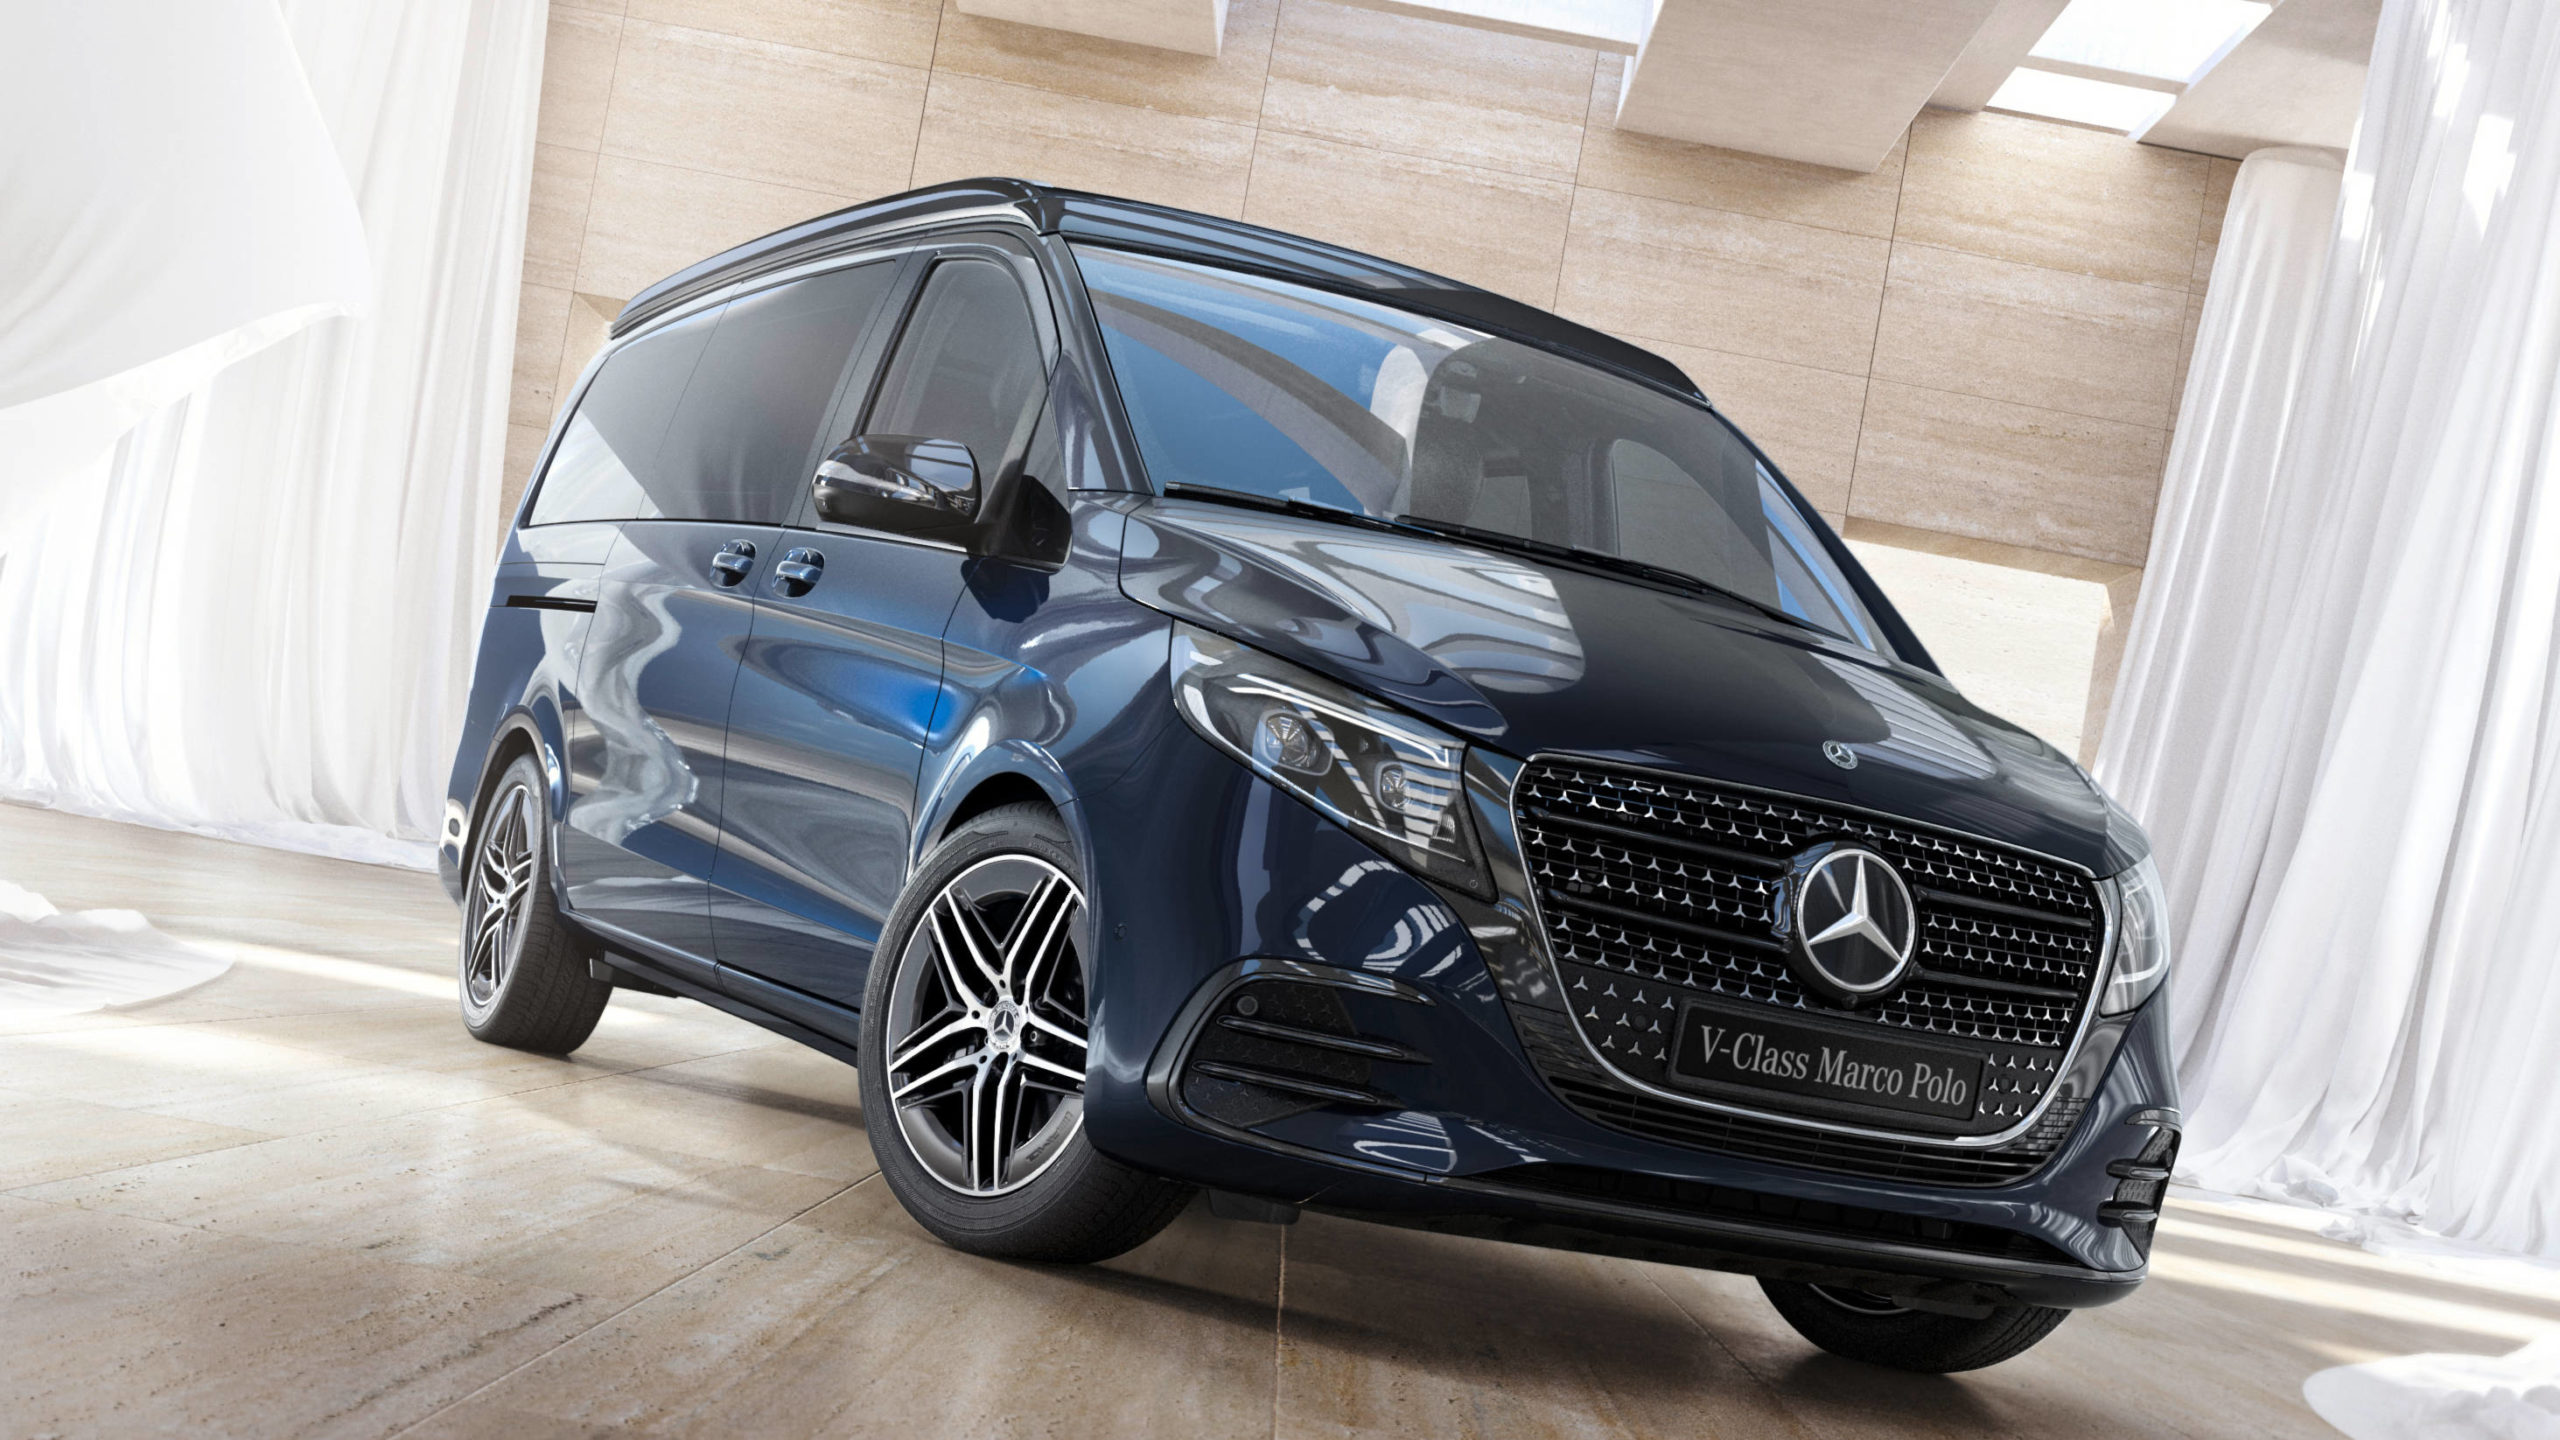 Mercedes V-Class Marco Polo Debuts With Redesigned Exterior And Interior